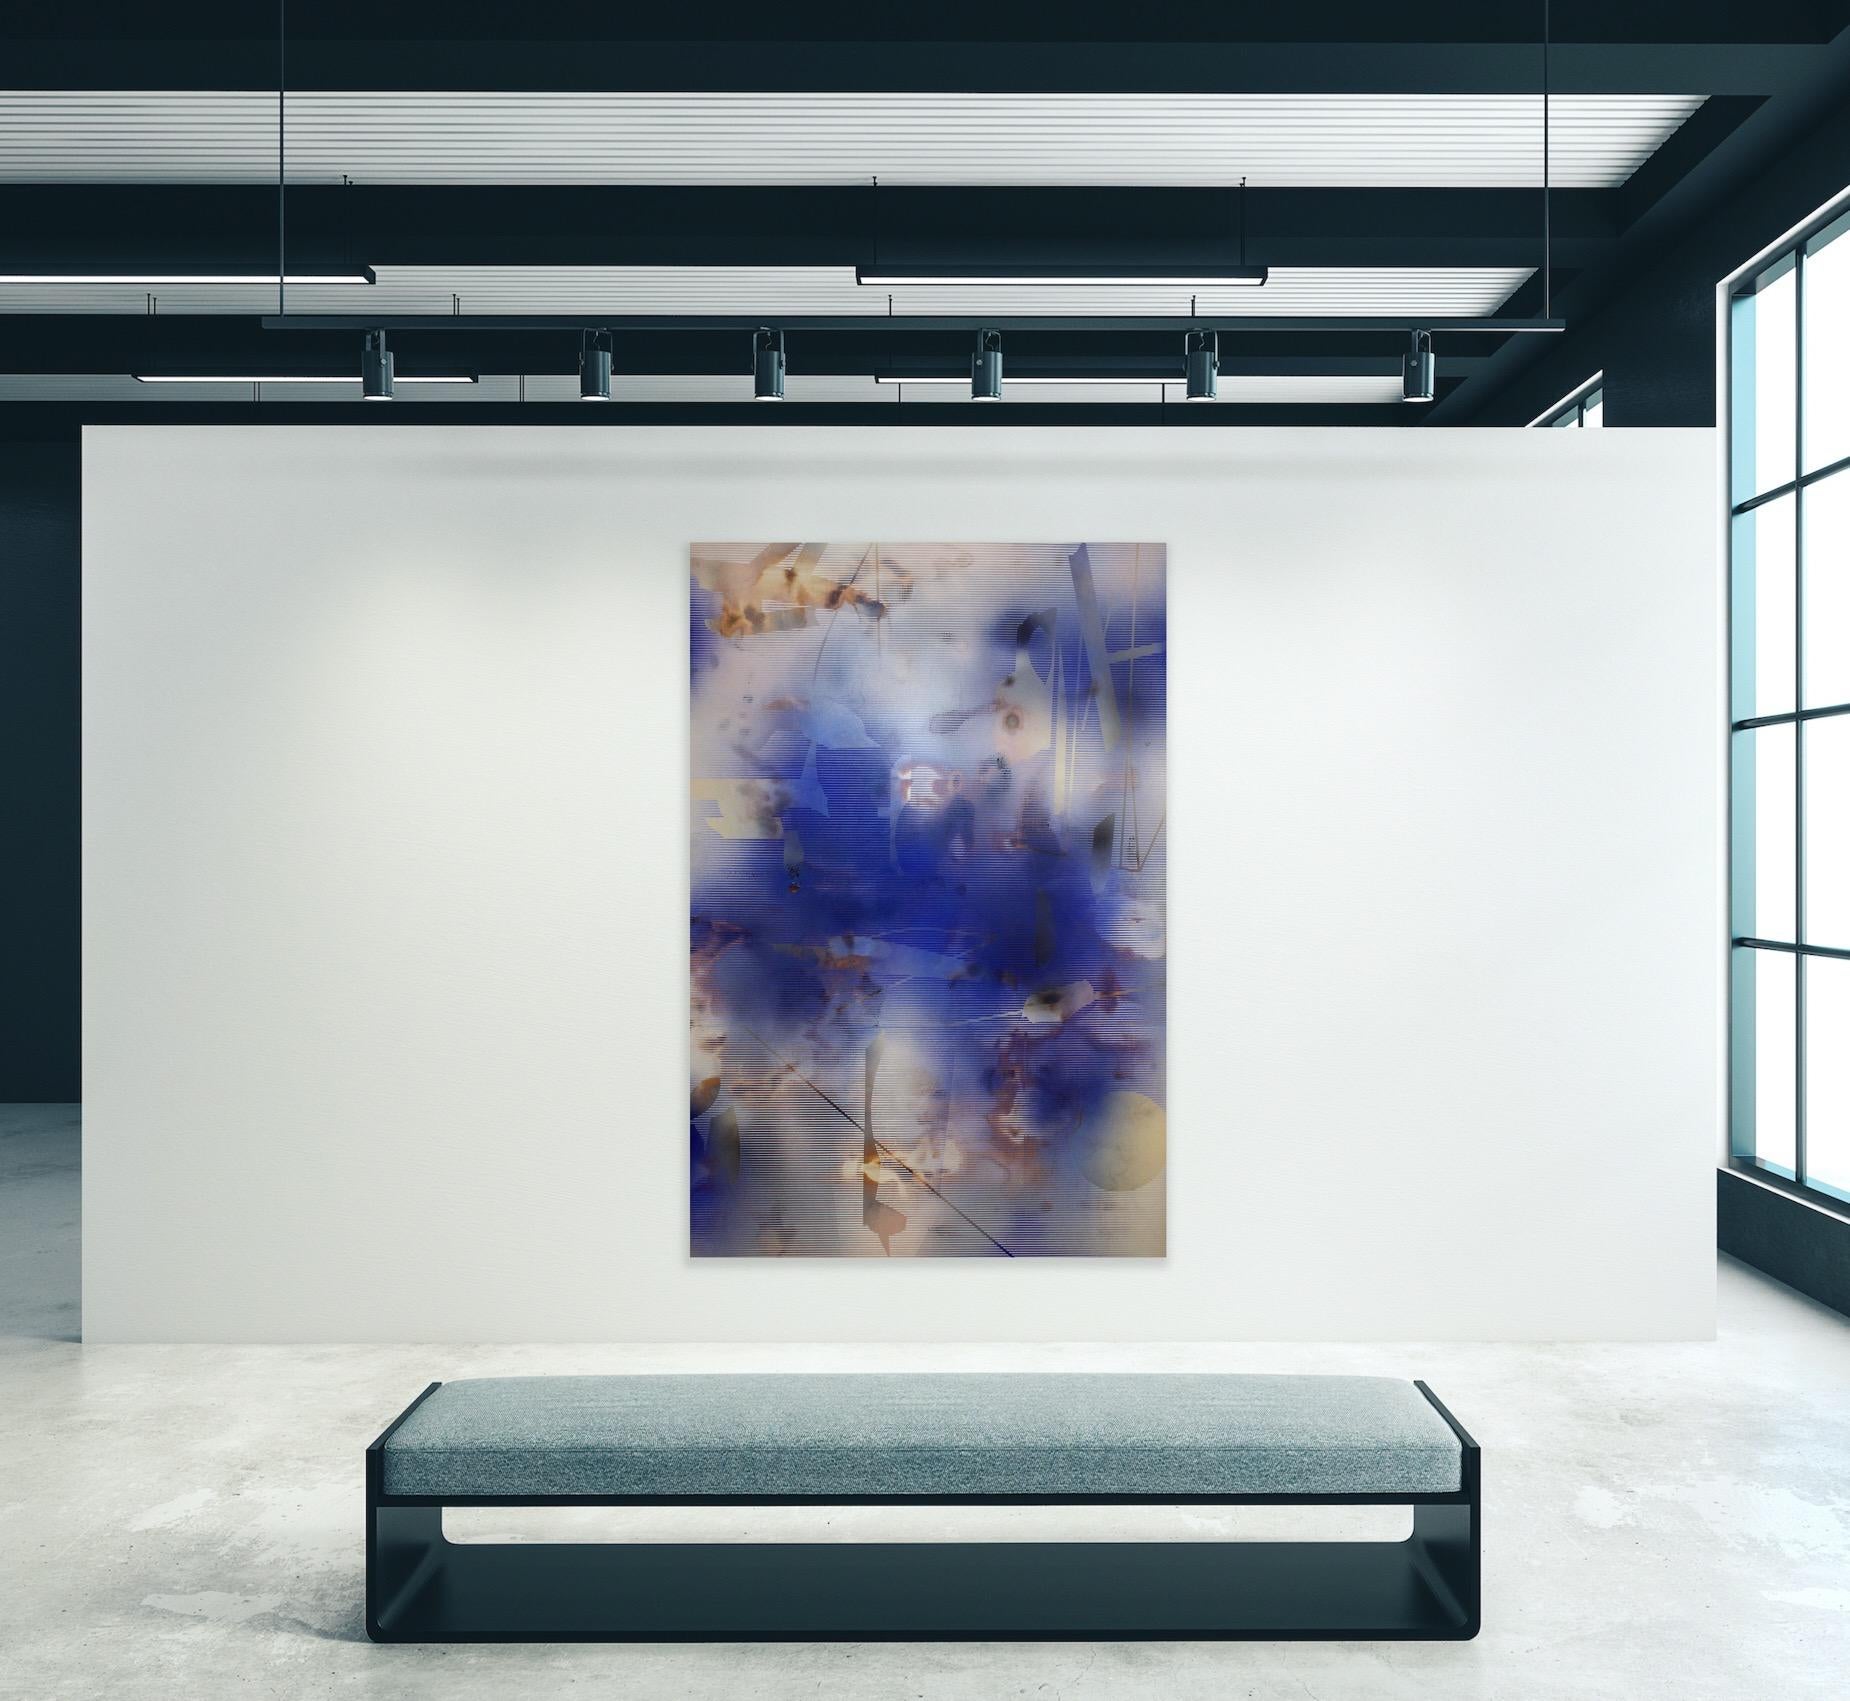 In Melisa’s optical and pulsating compositions, the natural world acts as blue-print while she explores the notion of the sublime through blur and precision. The artist develops an aesthetic of duality by hybridizing divergent approaches to art. Her